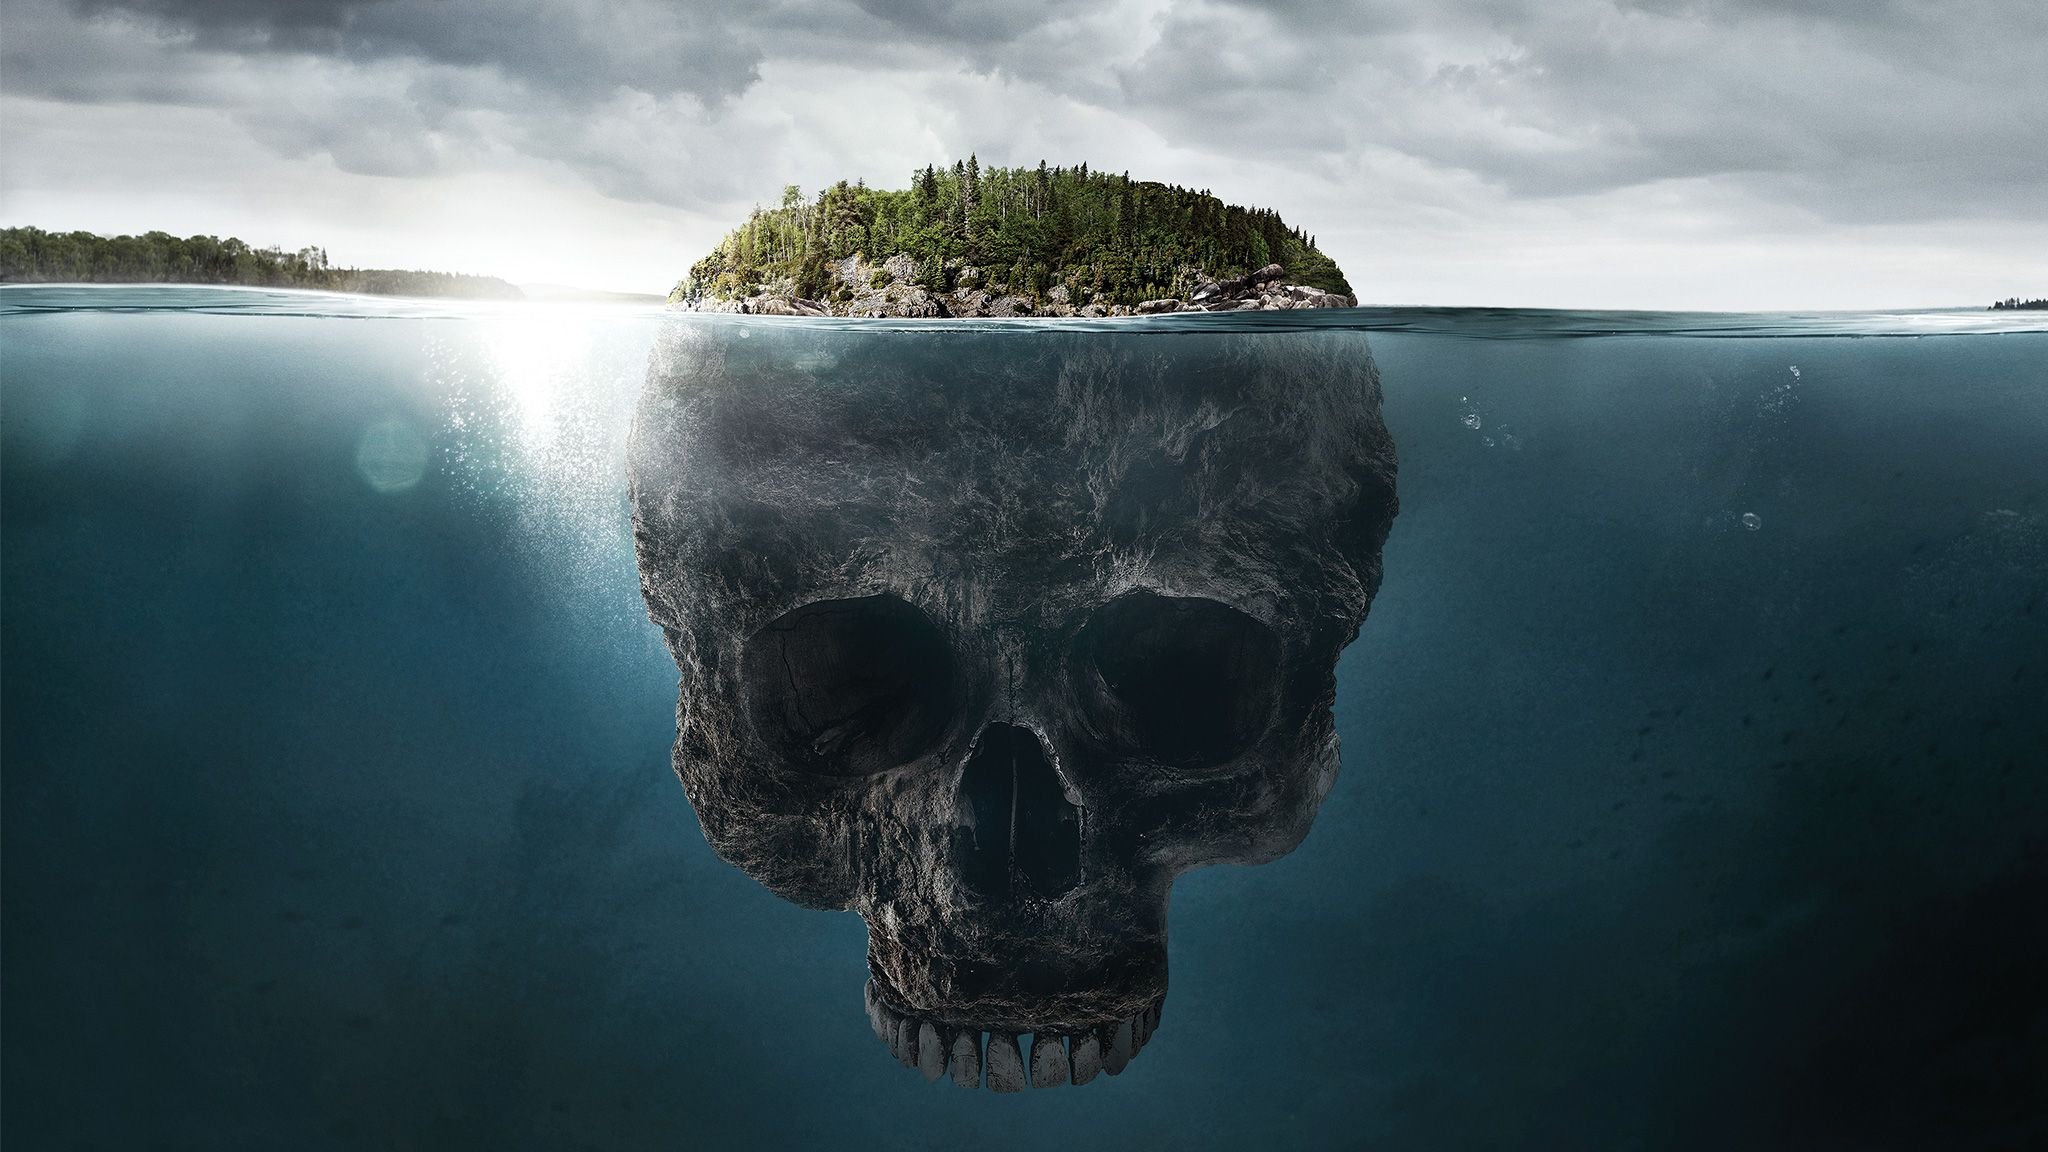 What Do You Know About The Curse Of Oak Island?